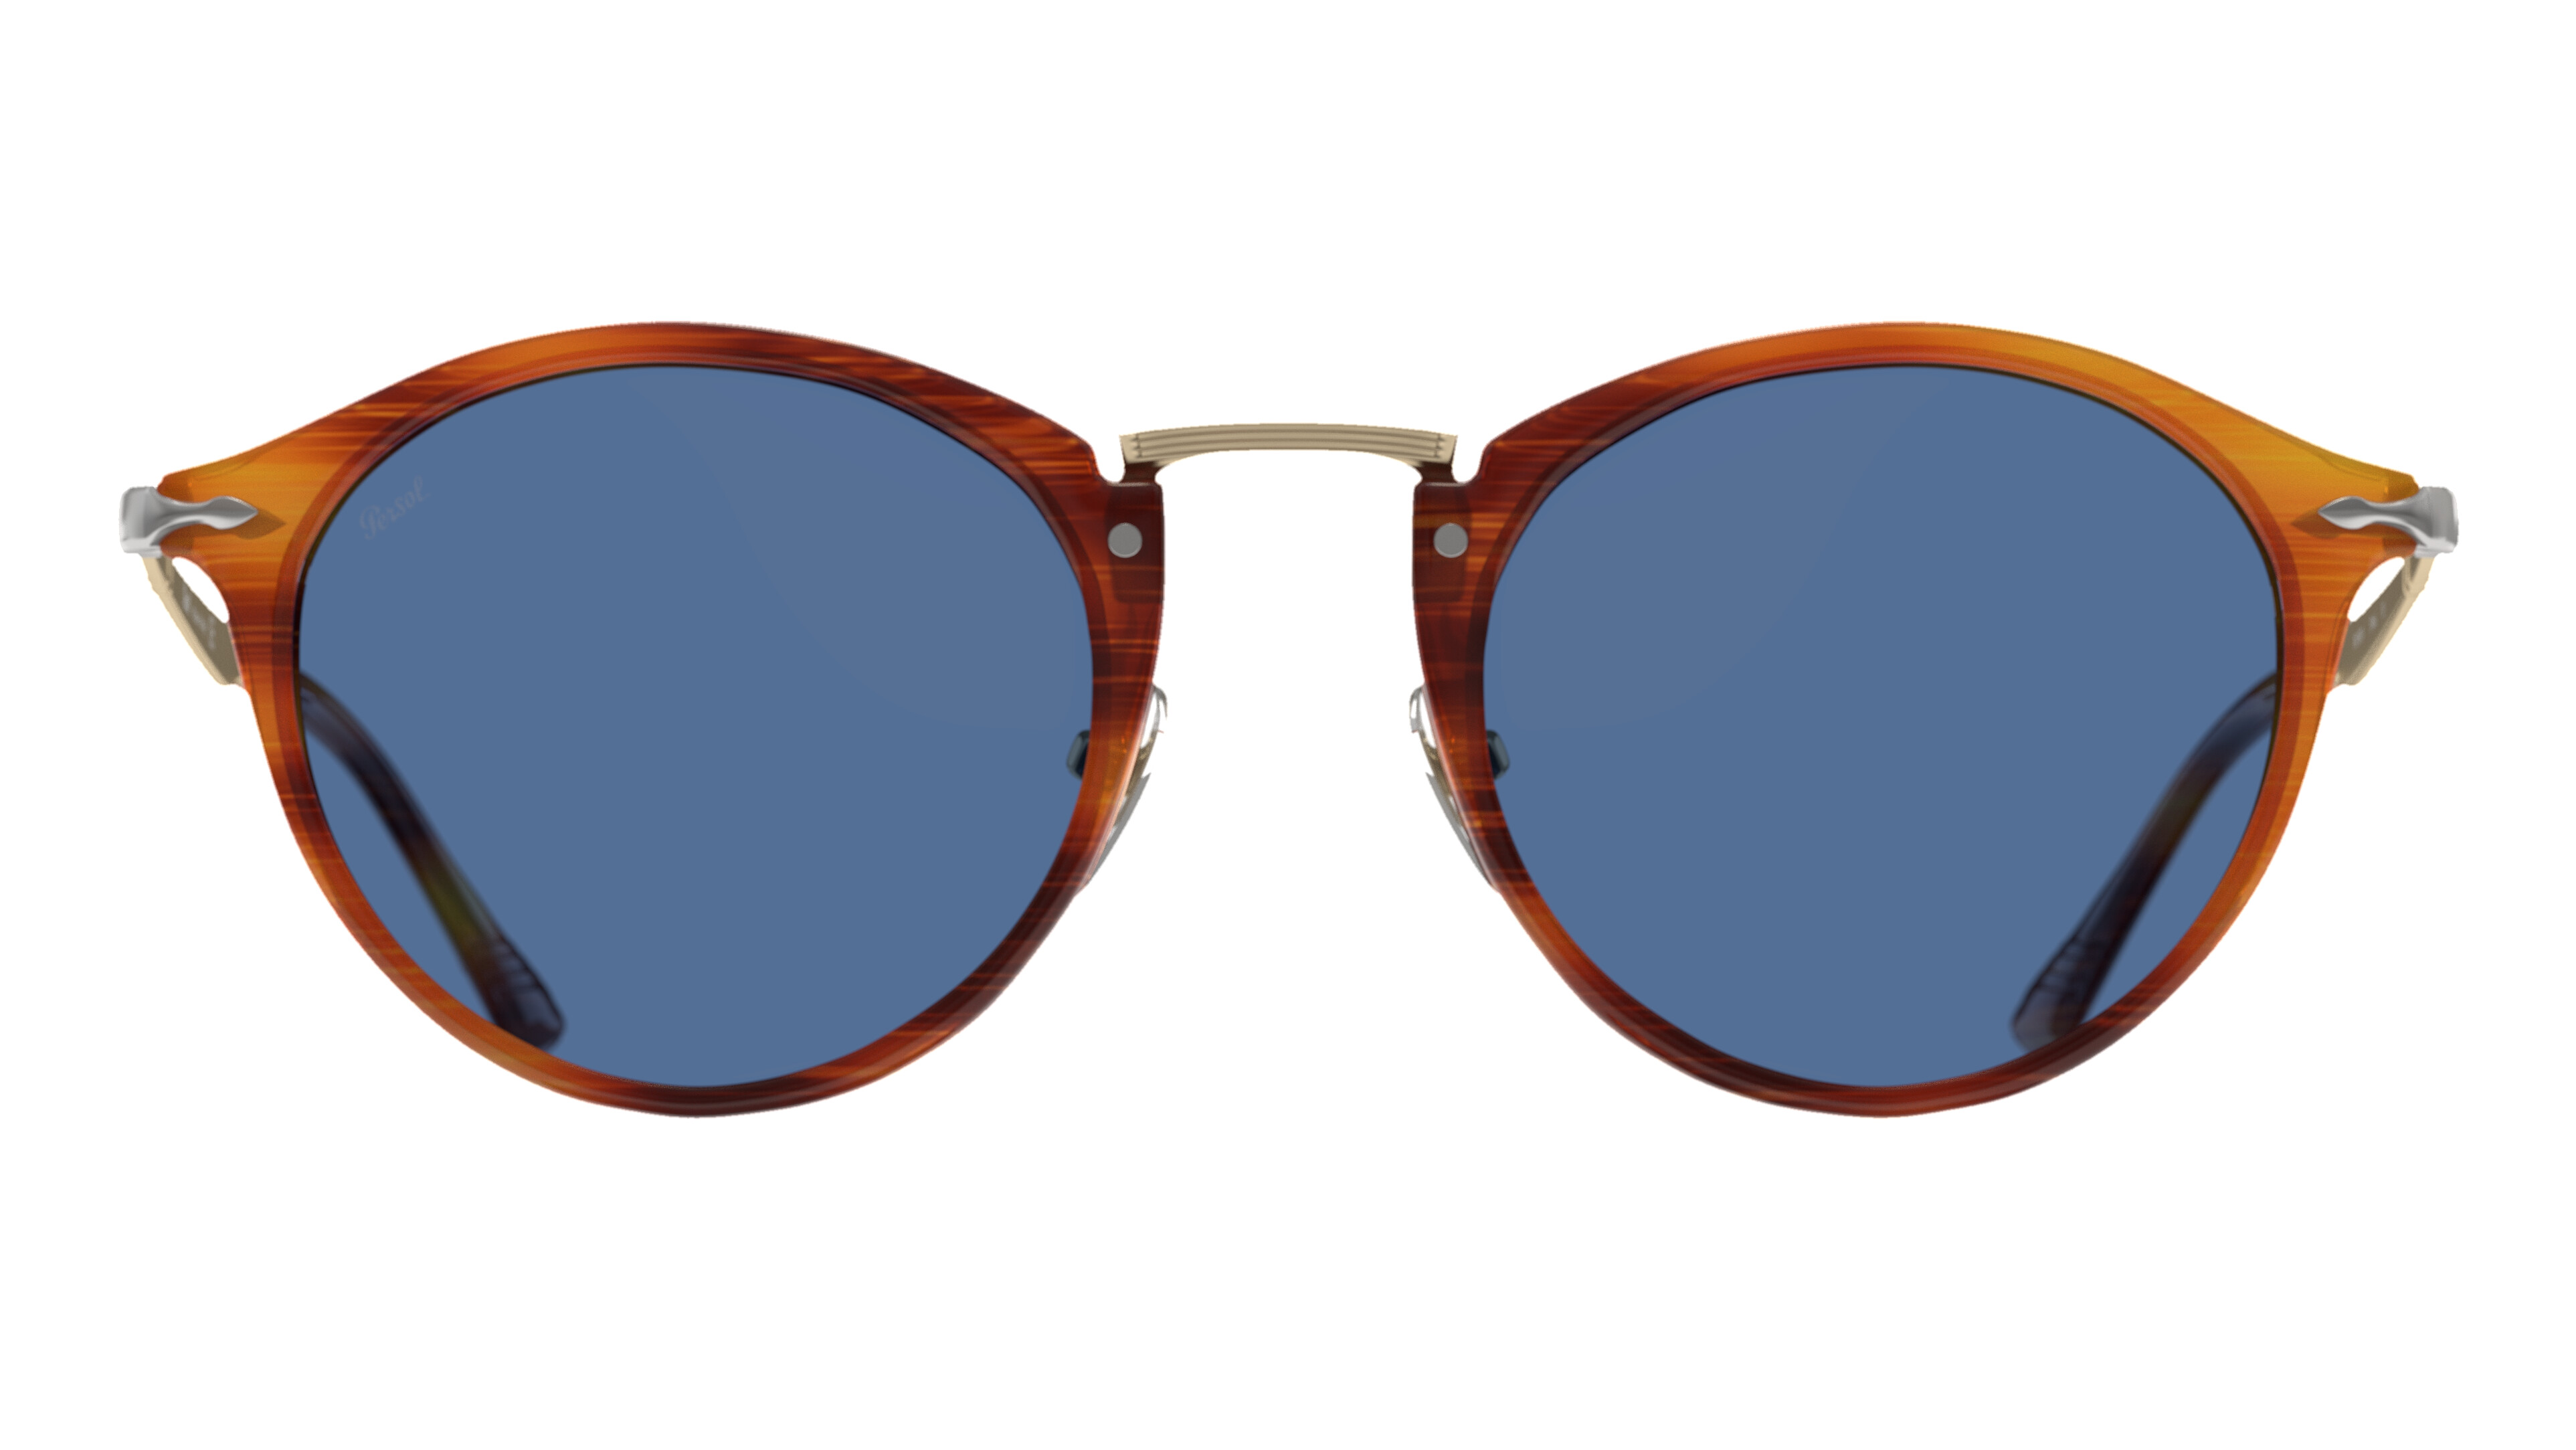 [products.image.front] Persol 0PO3166S 960/56 Sonnenbrille